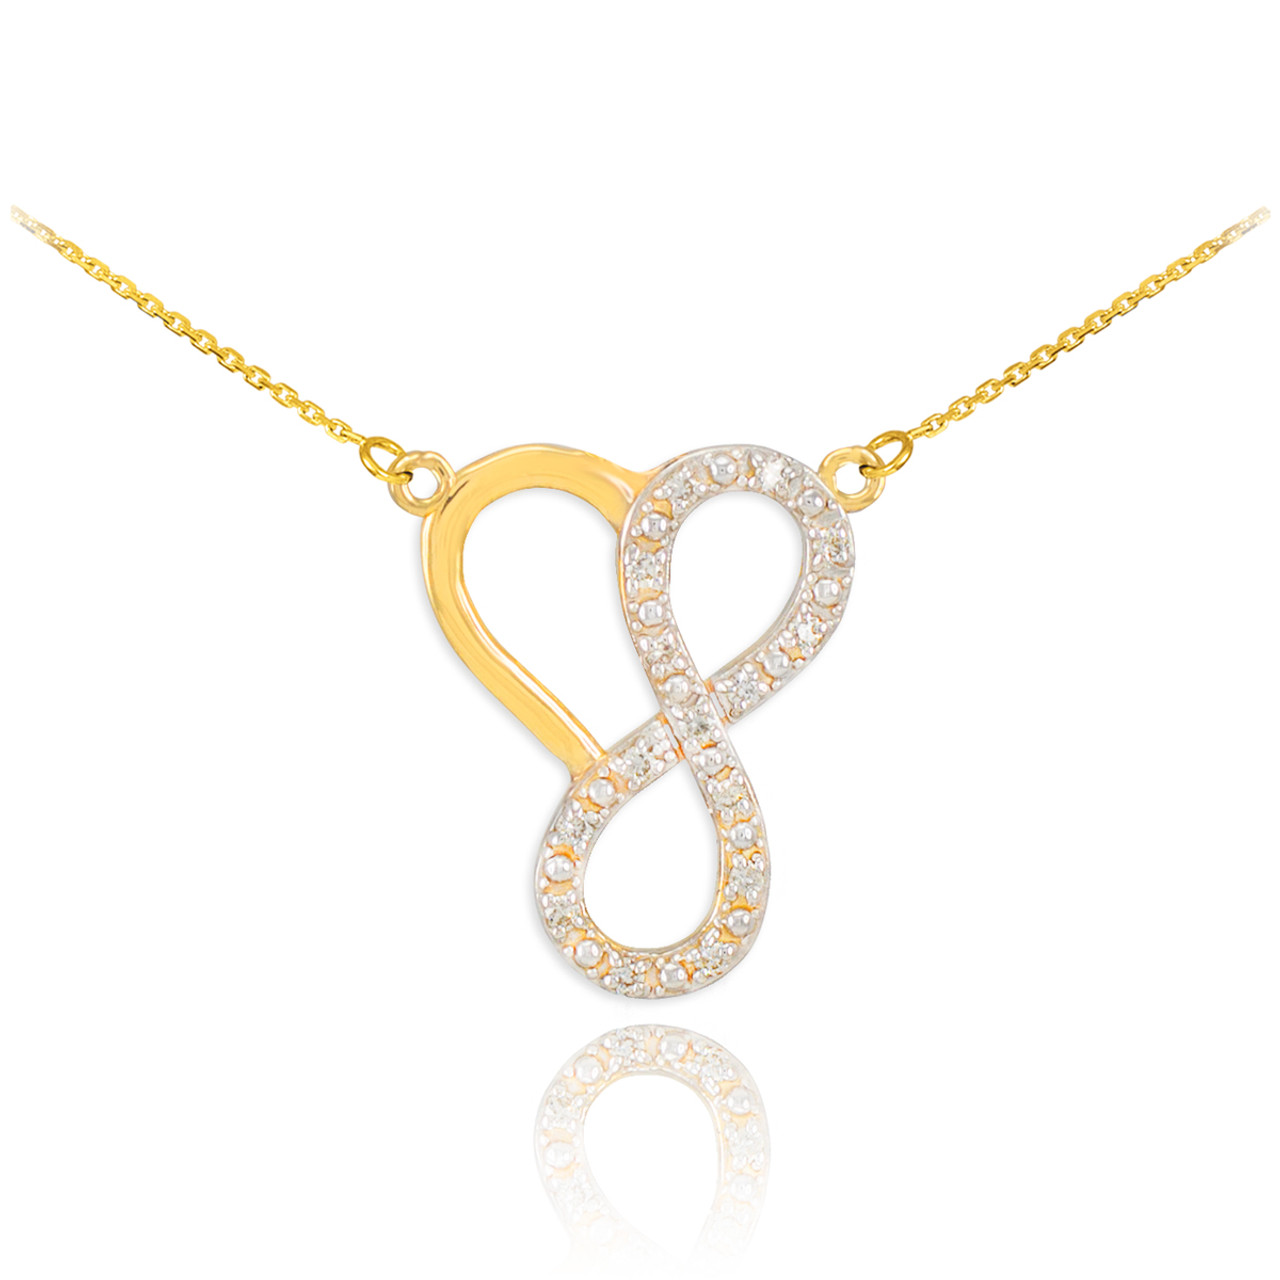 heartbeat necklace gold